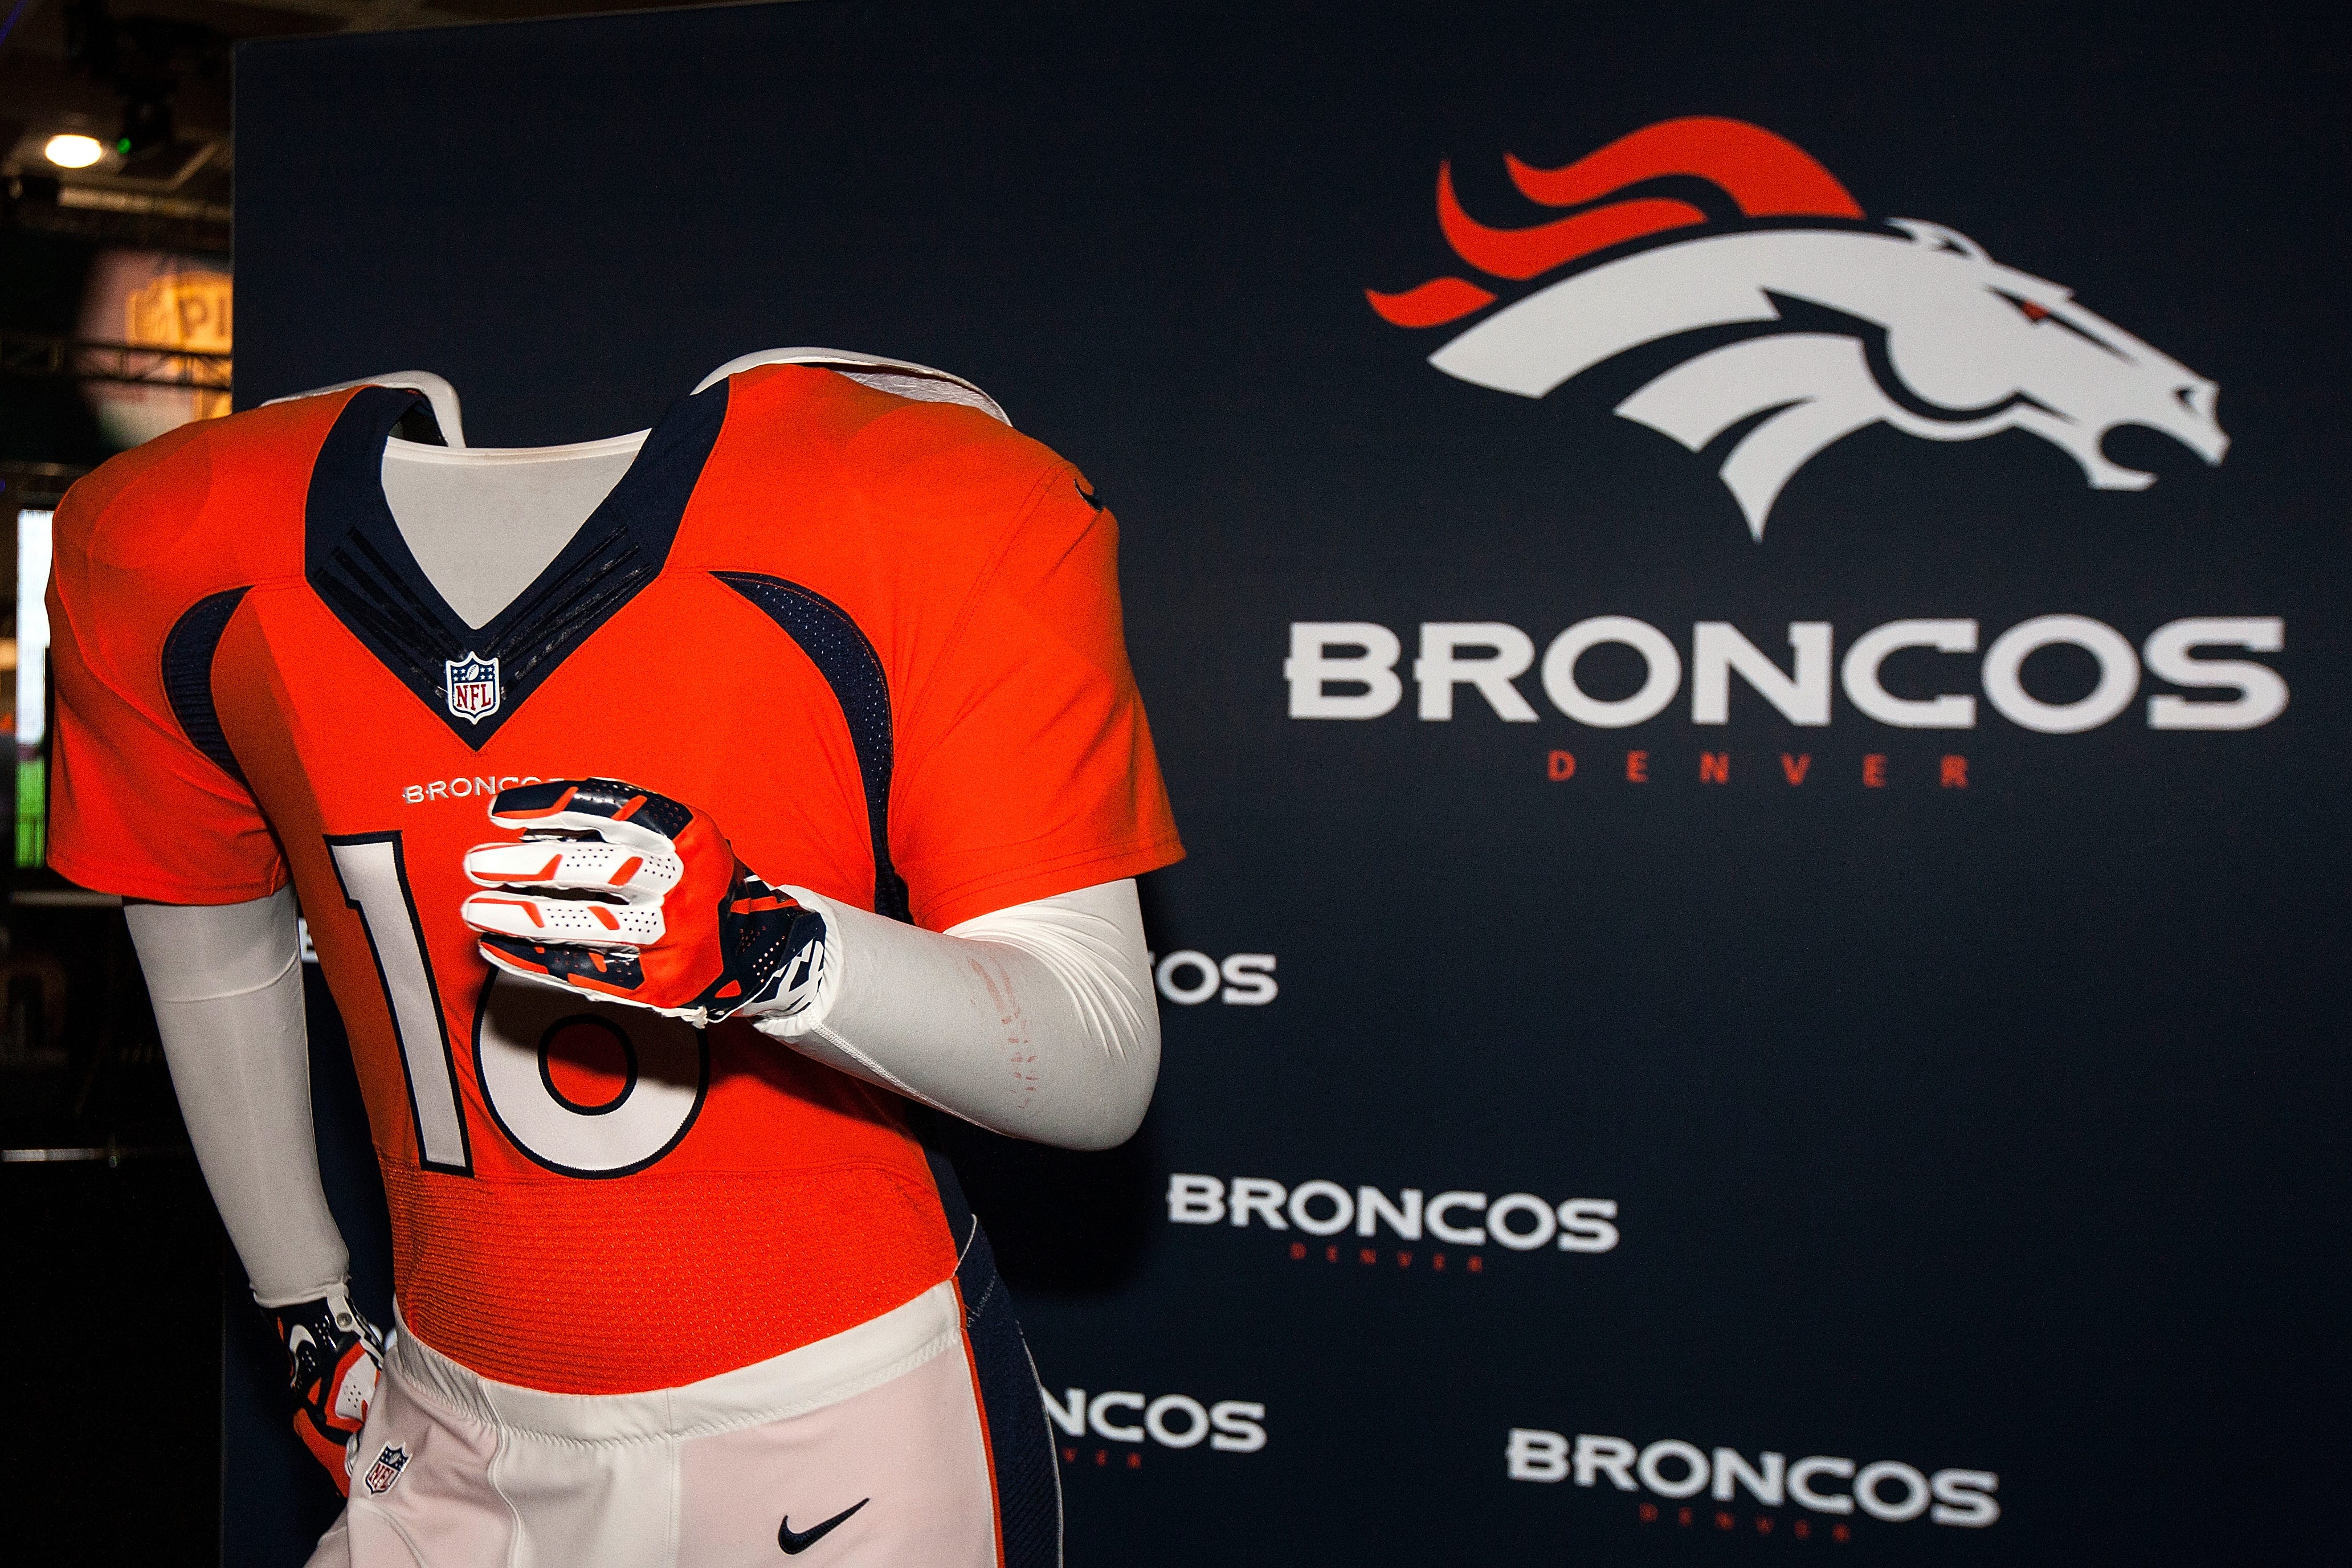 leaked details emerge for broncos' new uniforms